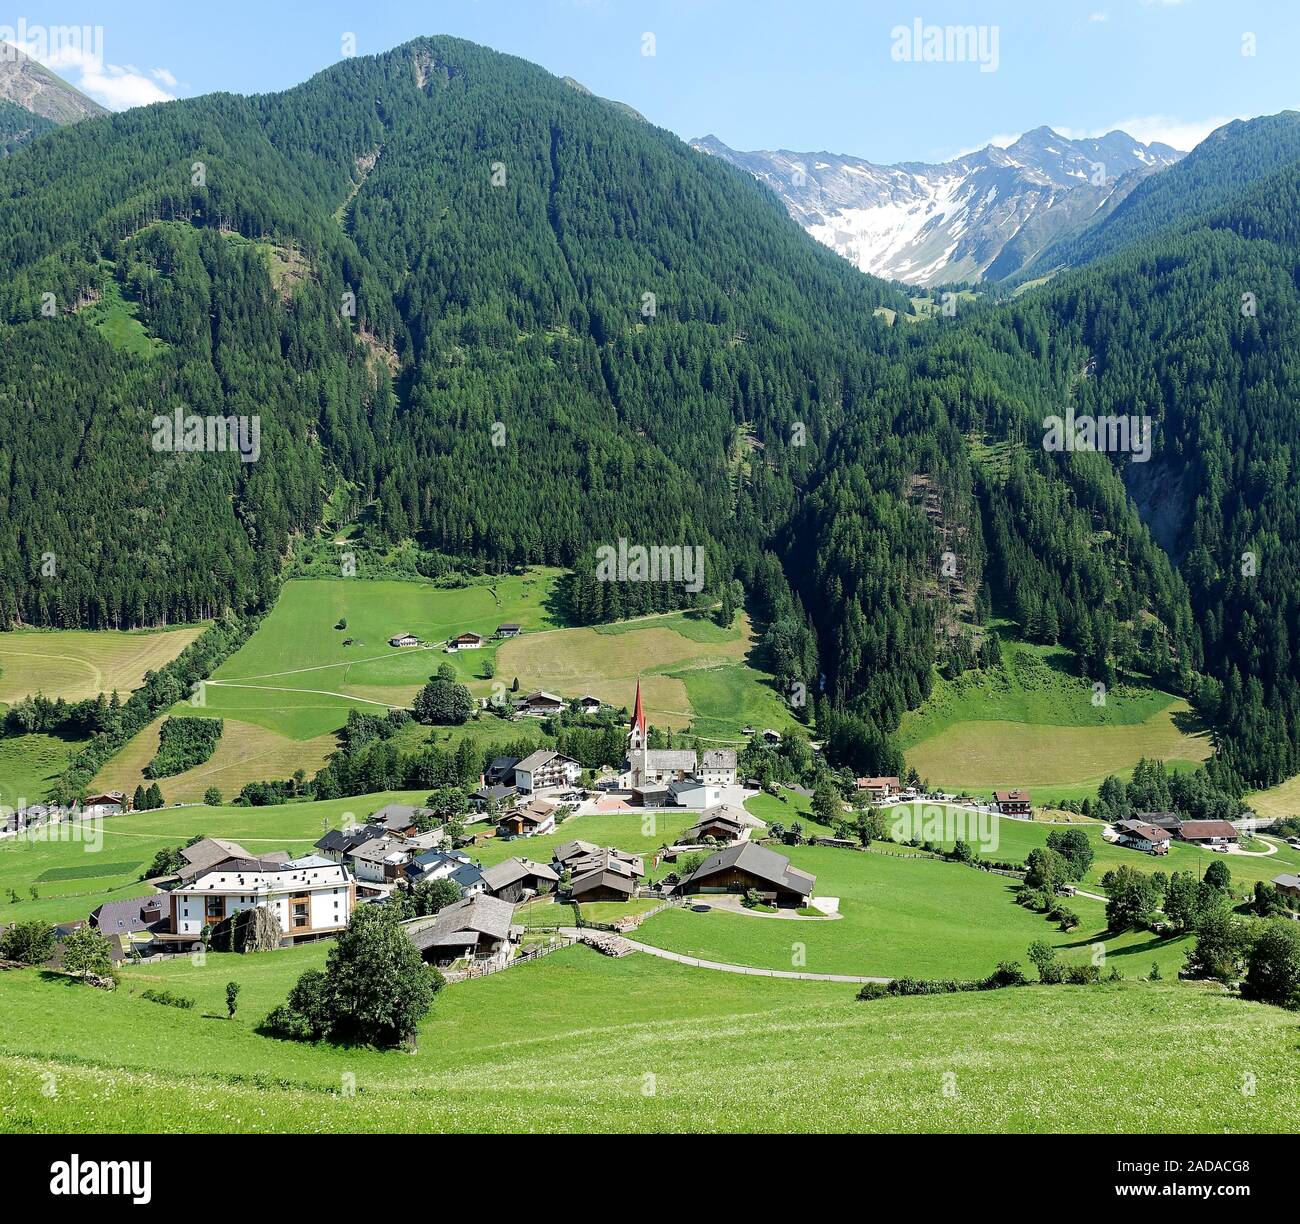 The picturesque village of Sankt Jakob in the Ahrntal Valley, South Tyrol, Italy Stock Photo